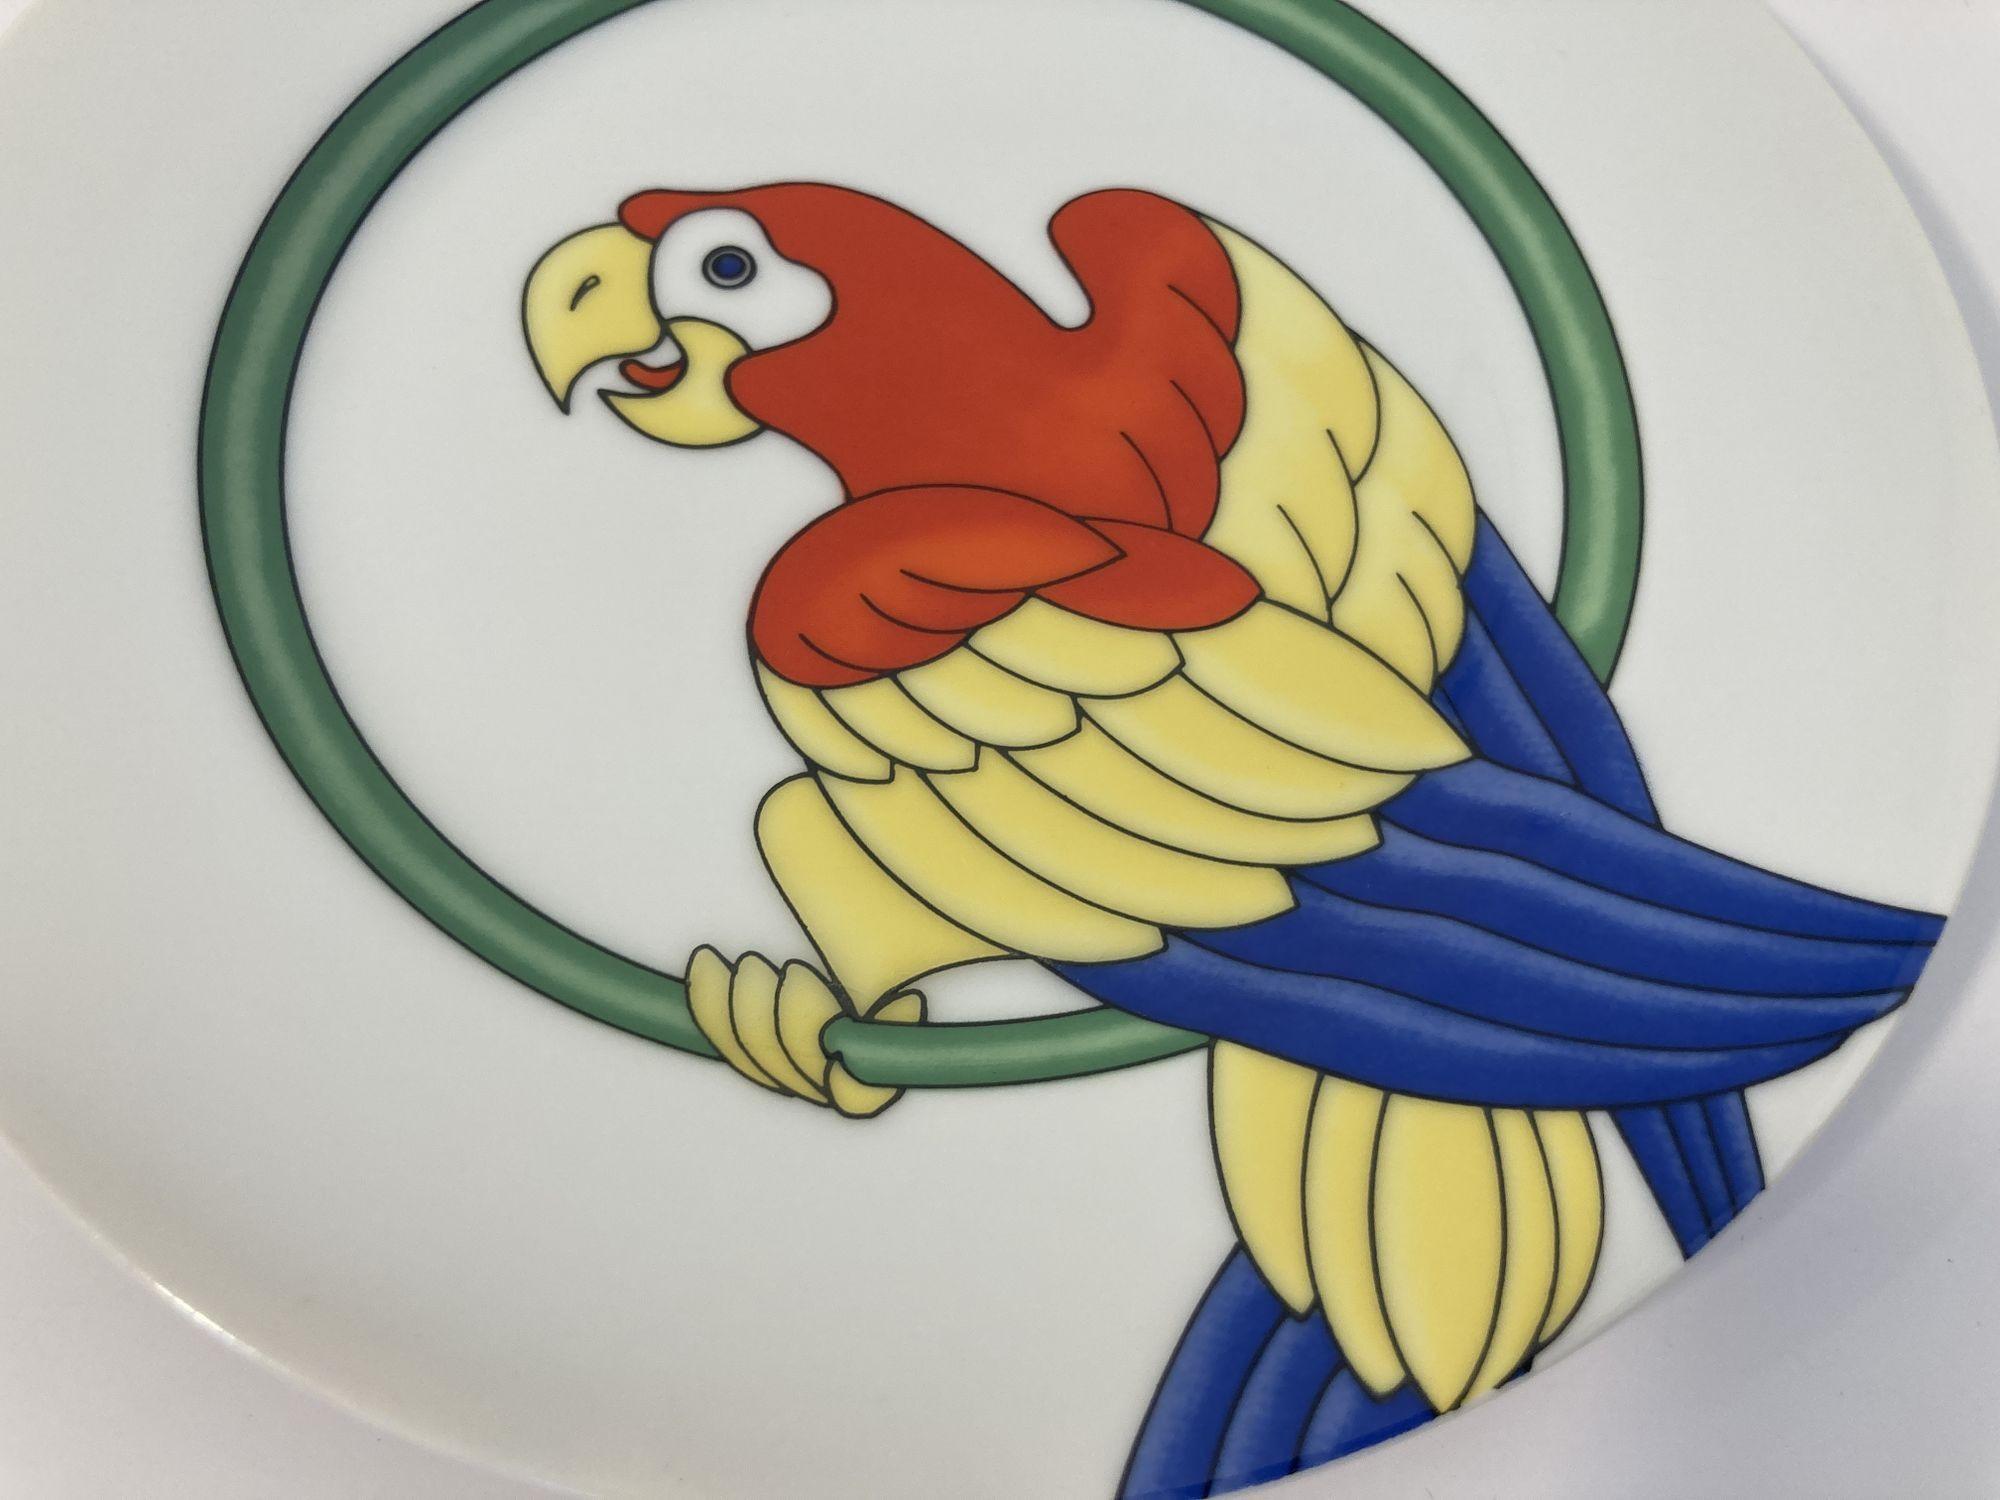 Vintage Parrots Decorative Plates by Fitz and Floyd Set of 4 In Good Condition For Sale In North Hollywood, CA